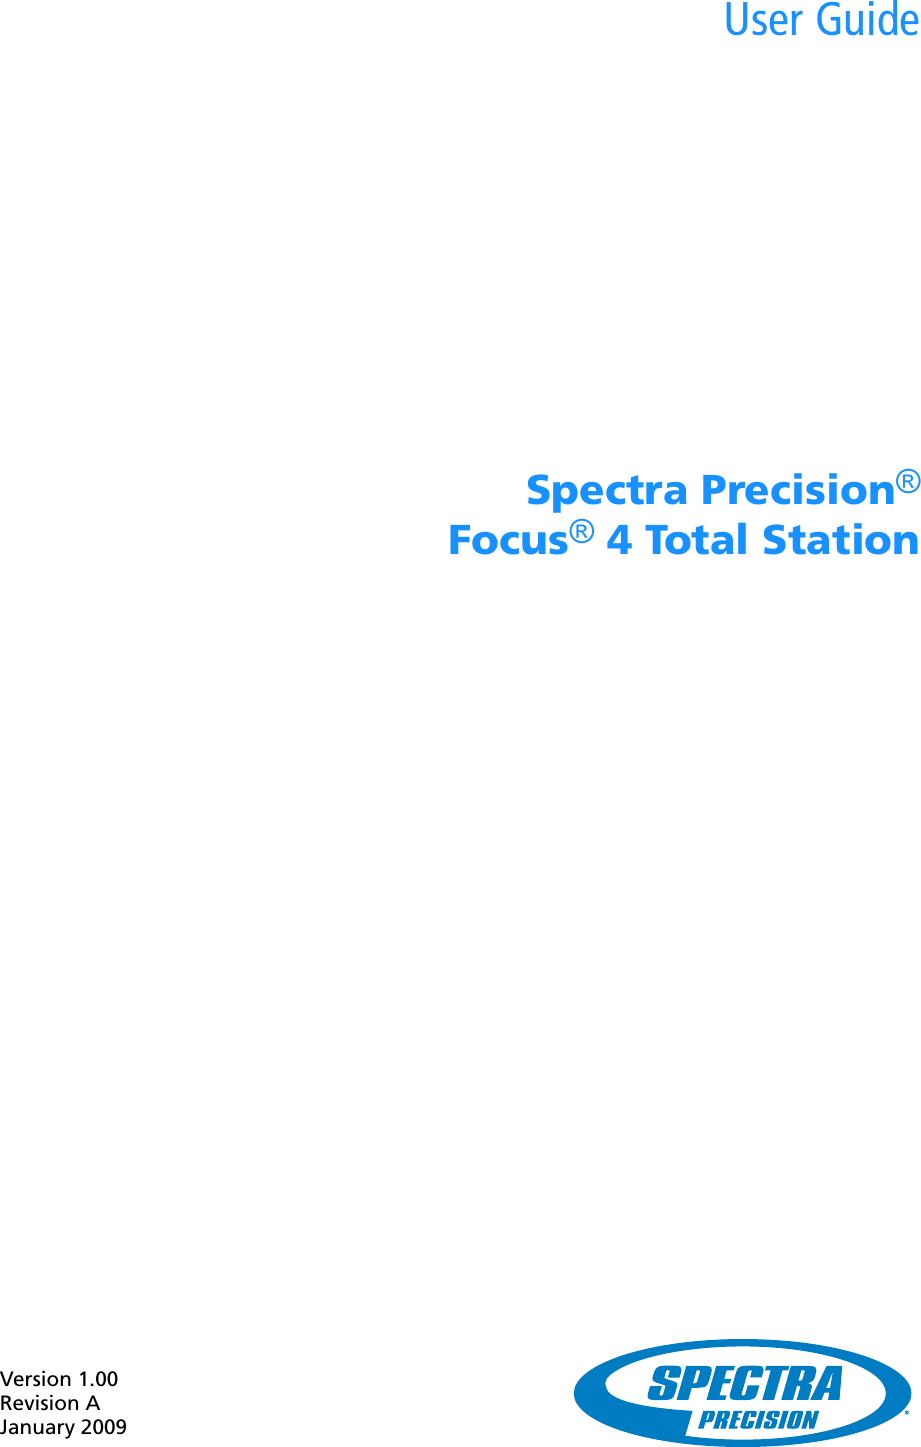 Version 1.00Revision AJanuary 2009User GuideSpectra Precision®Focus® 4 Total Station